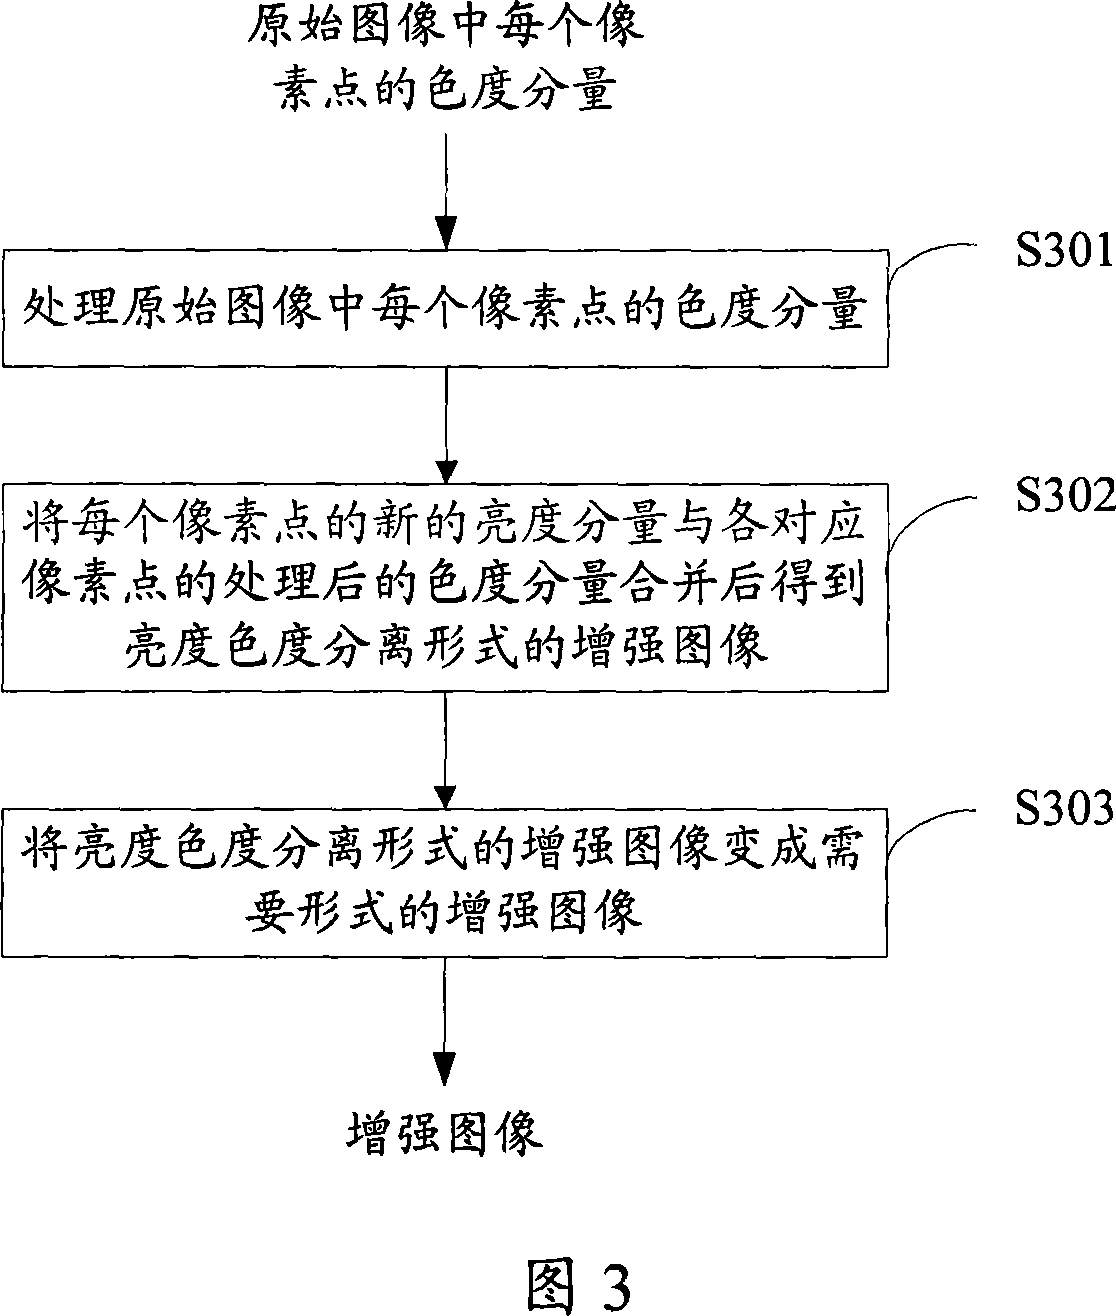 Image enhancing method and device